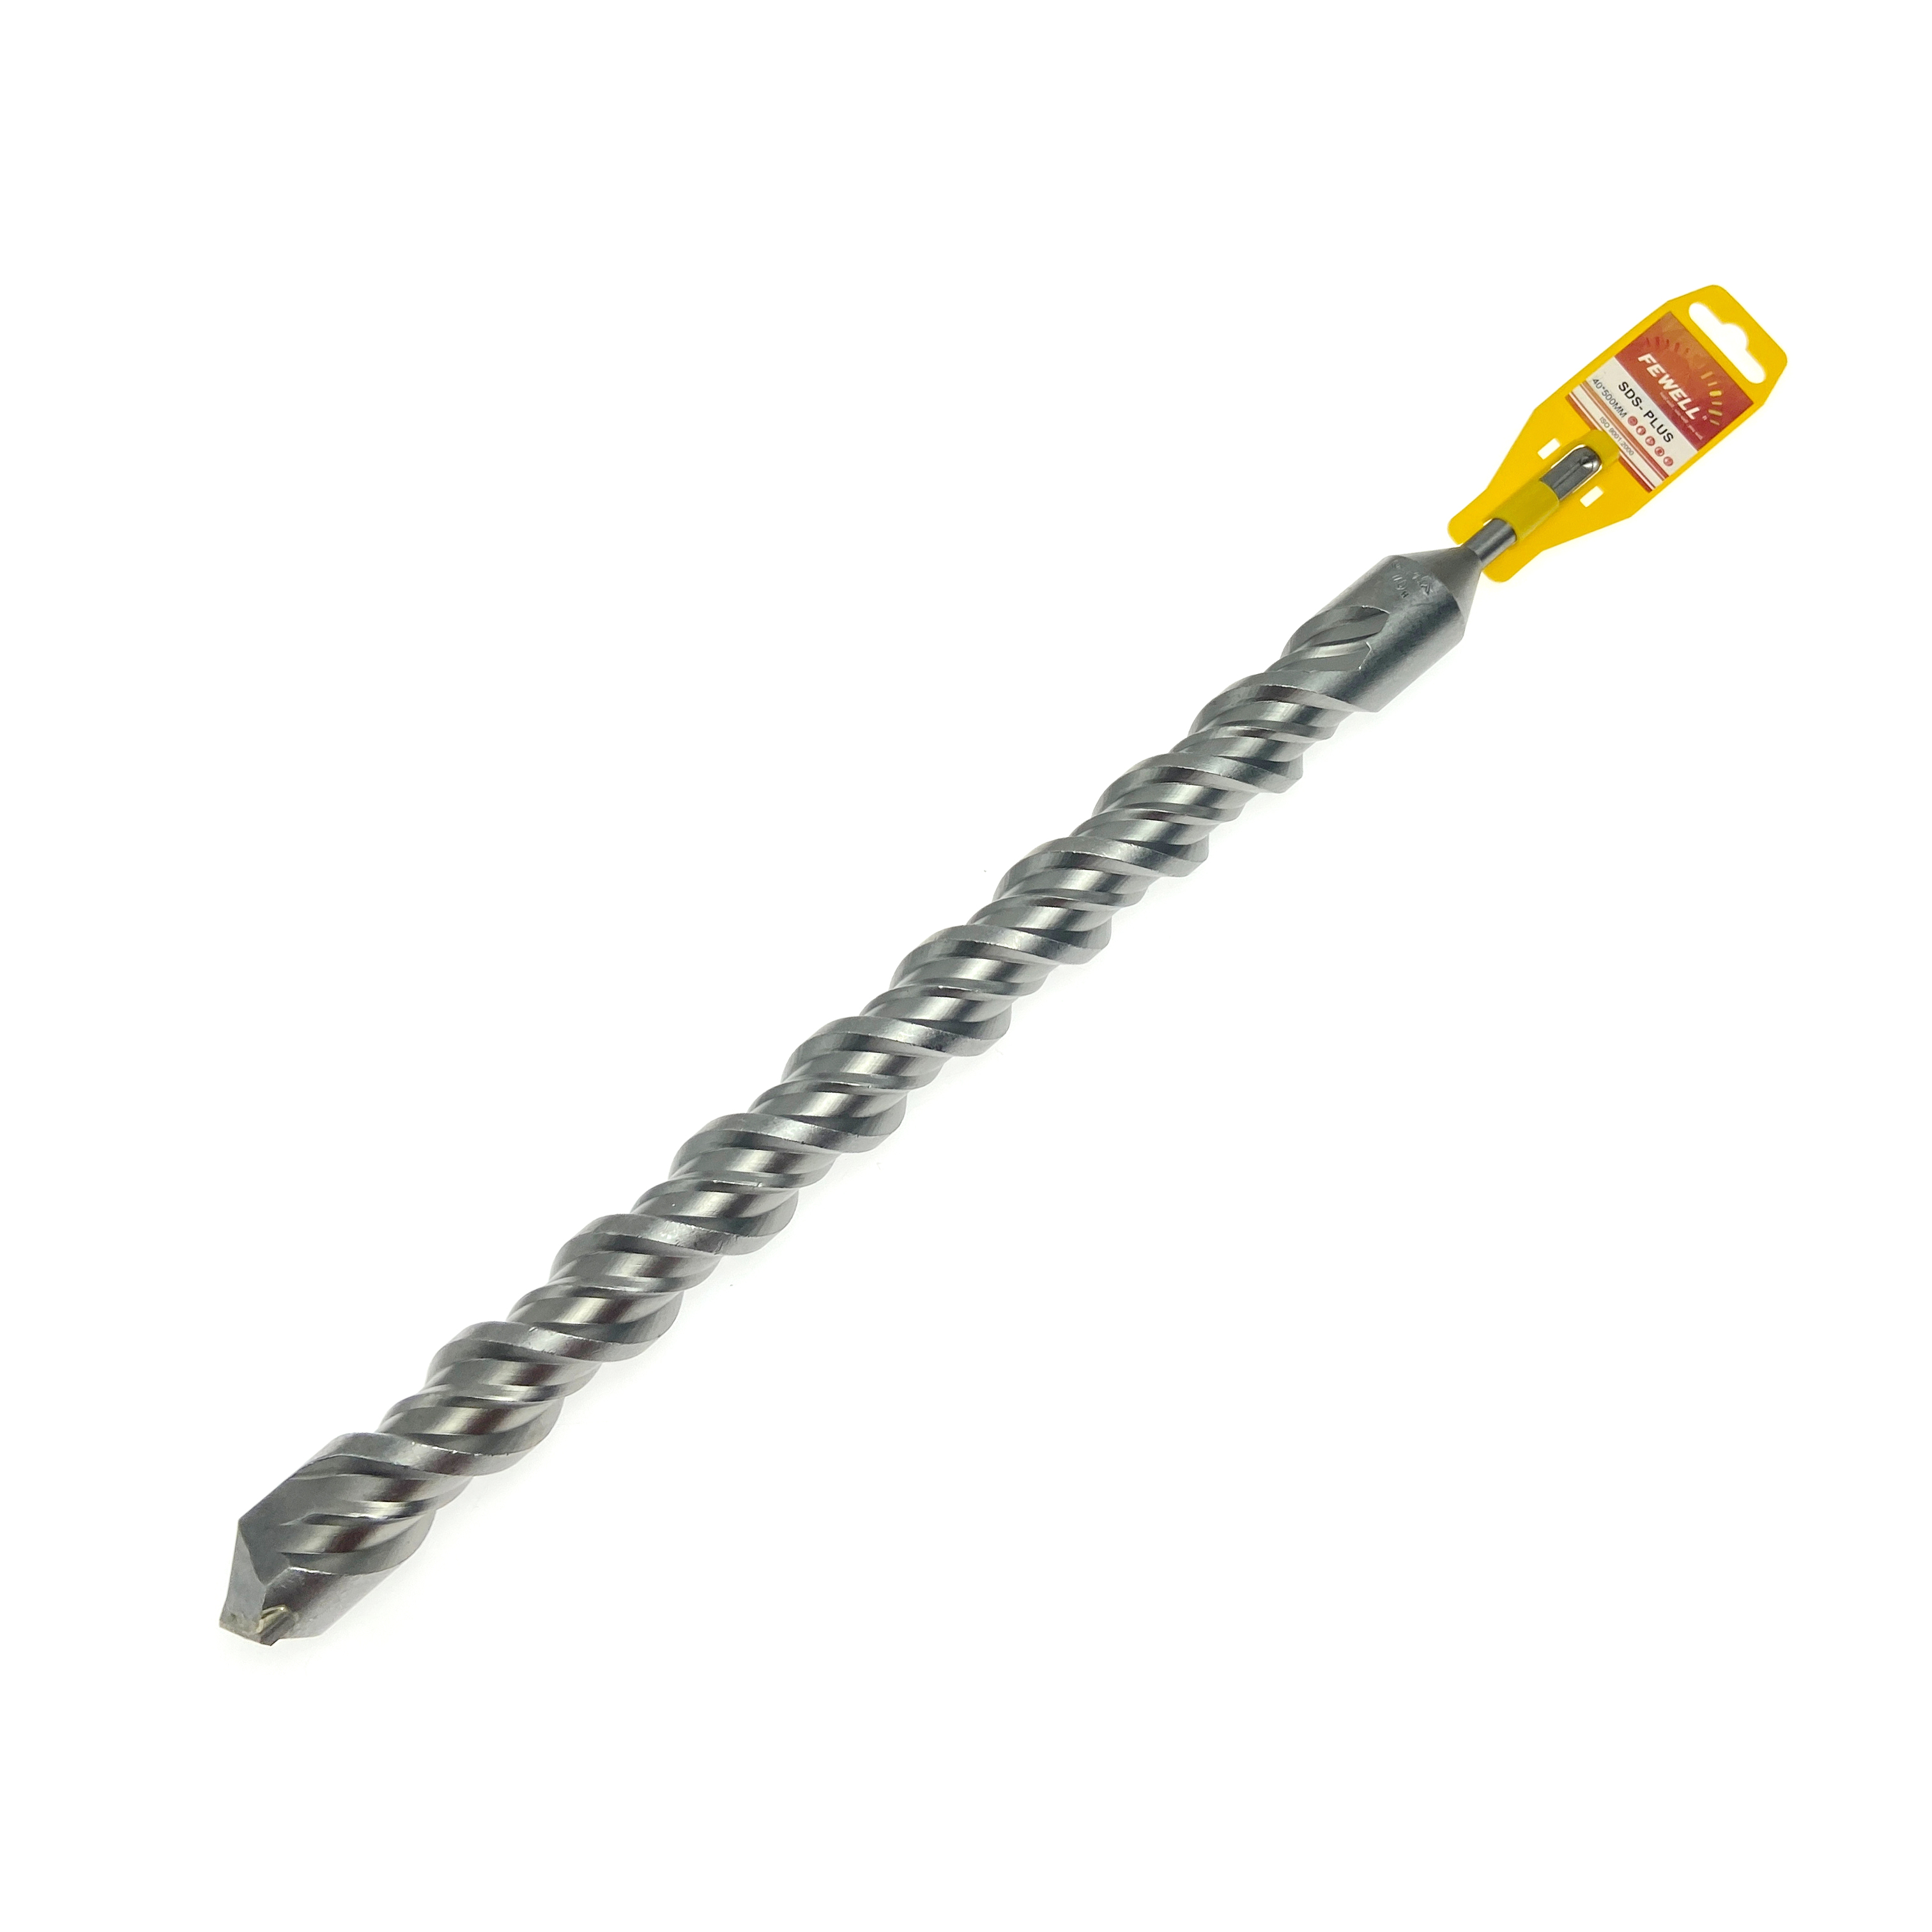 High quality SDS Plus Carbide Single Flat Tip 40*500/600/800/1000mm Double Flute Electric Hammer Drill Bit for Concrete wall Masonry Hard Stone Granite